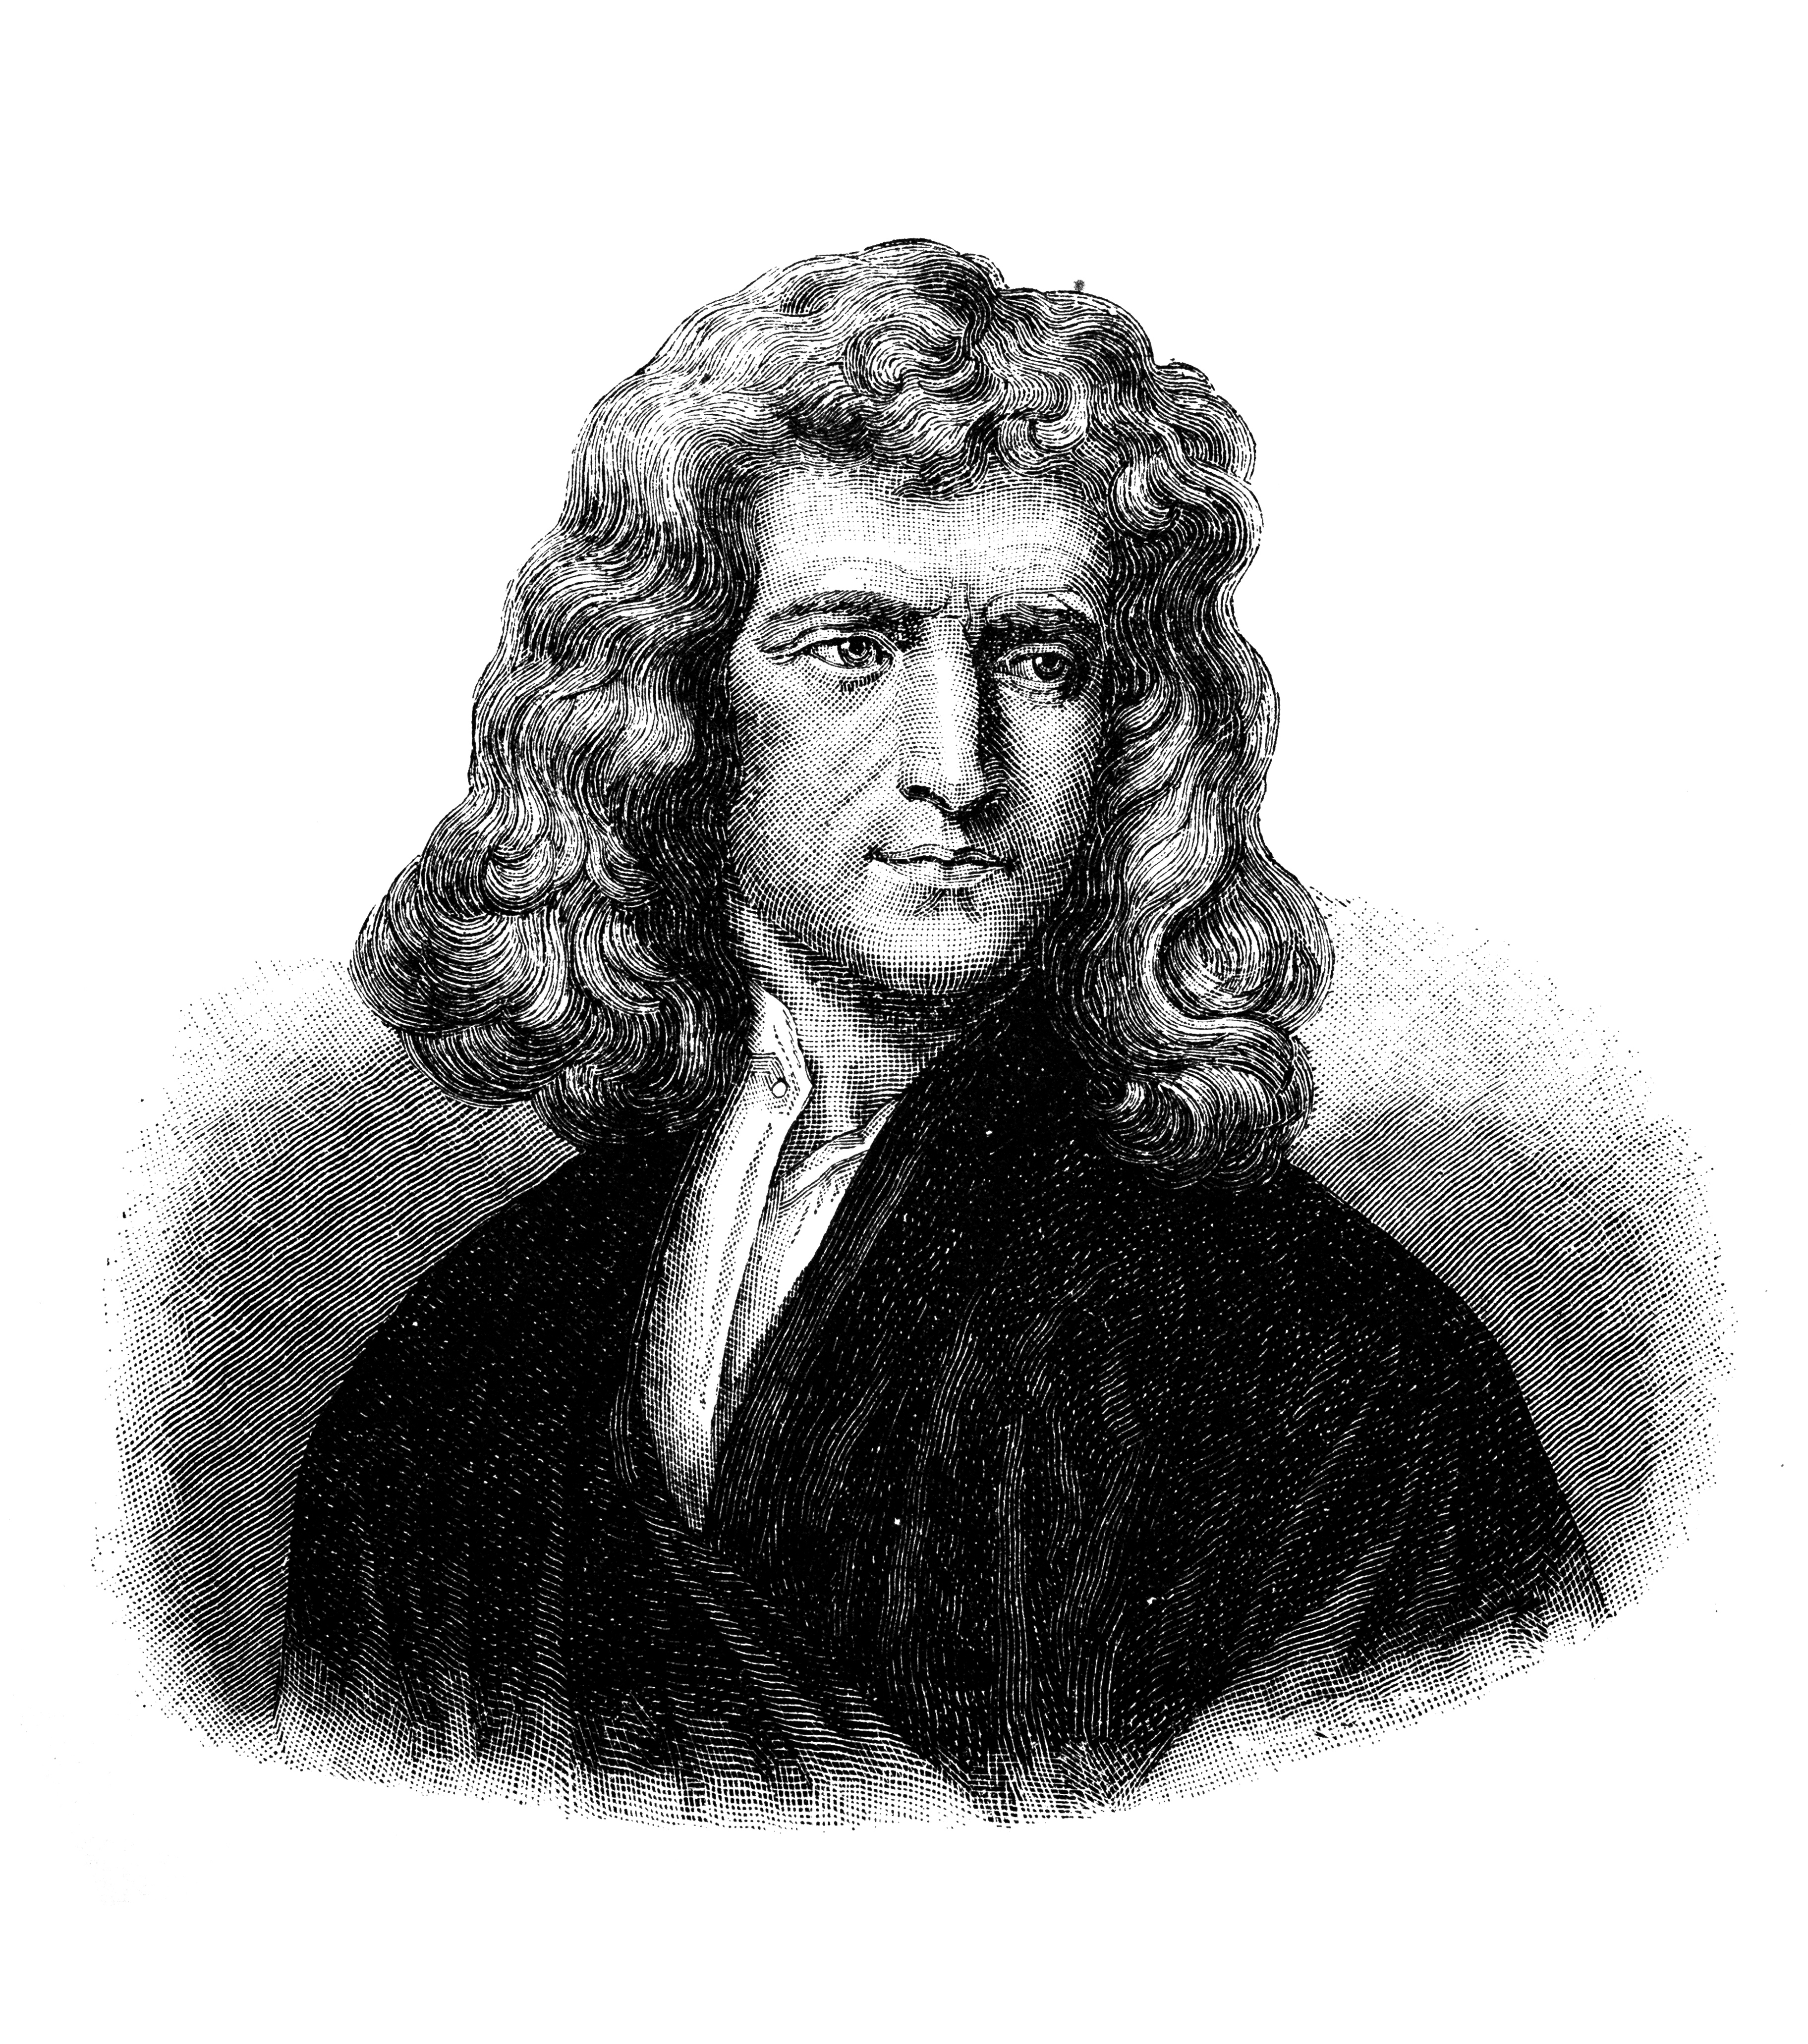 Illustration of a man with long hair